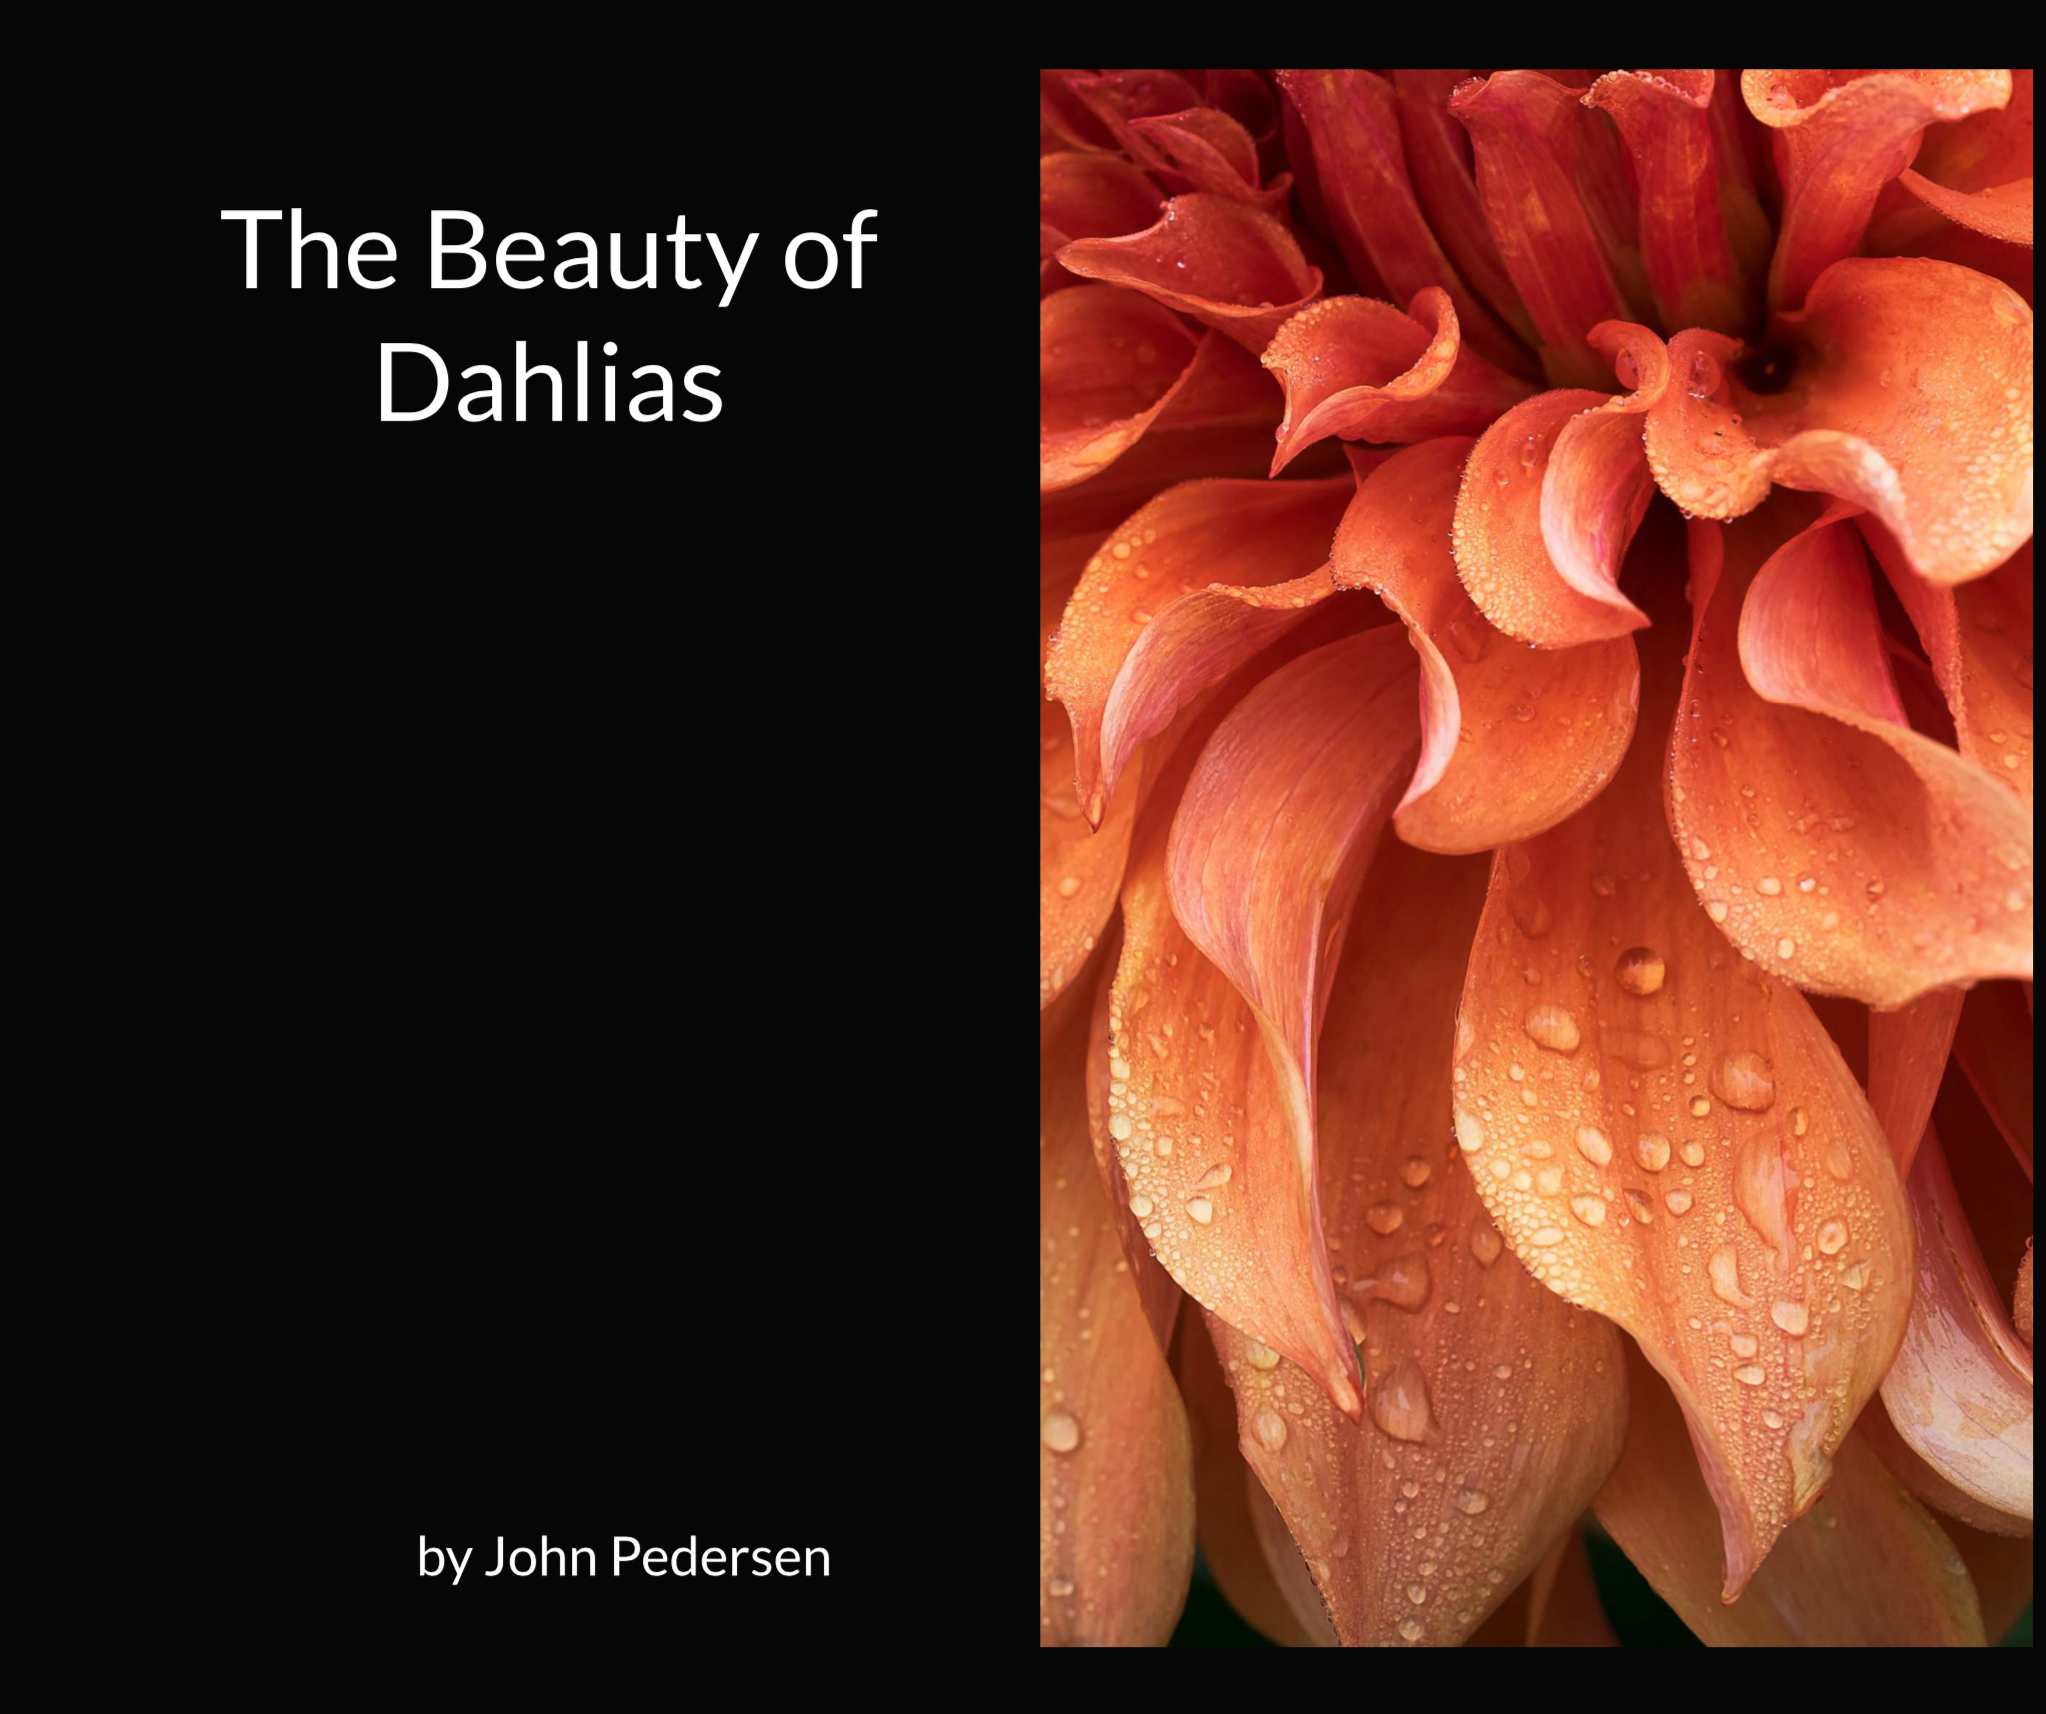 Book of dahlia flower pictures